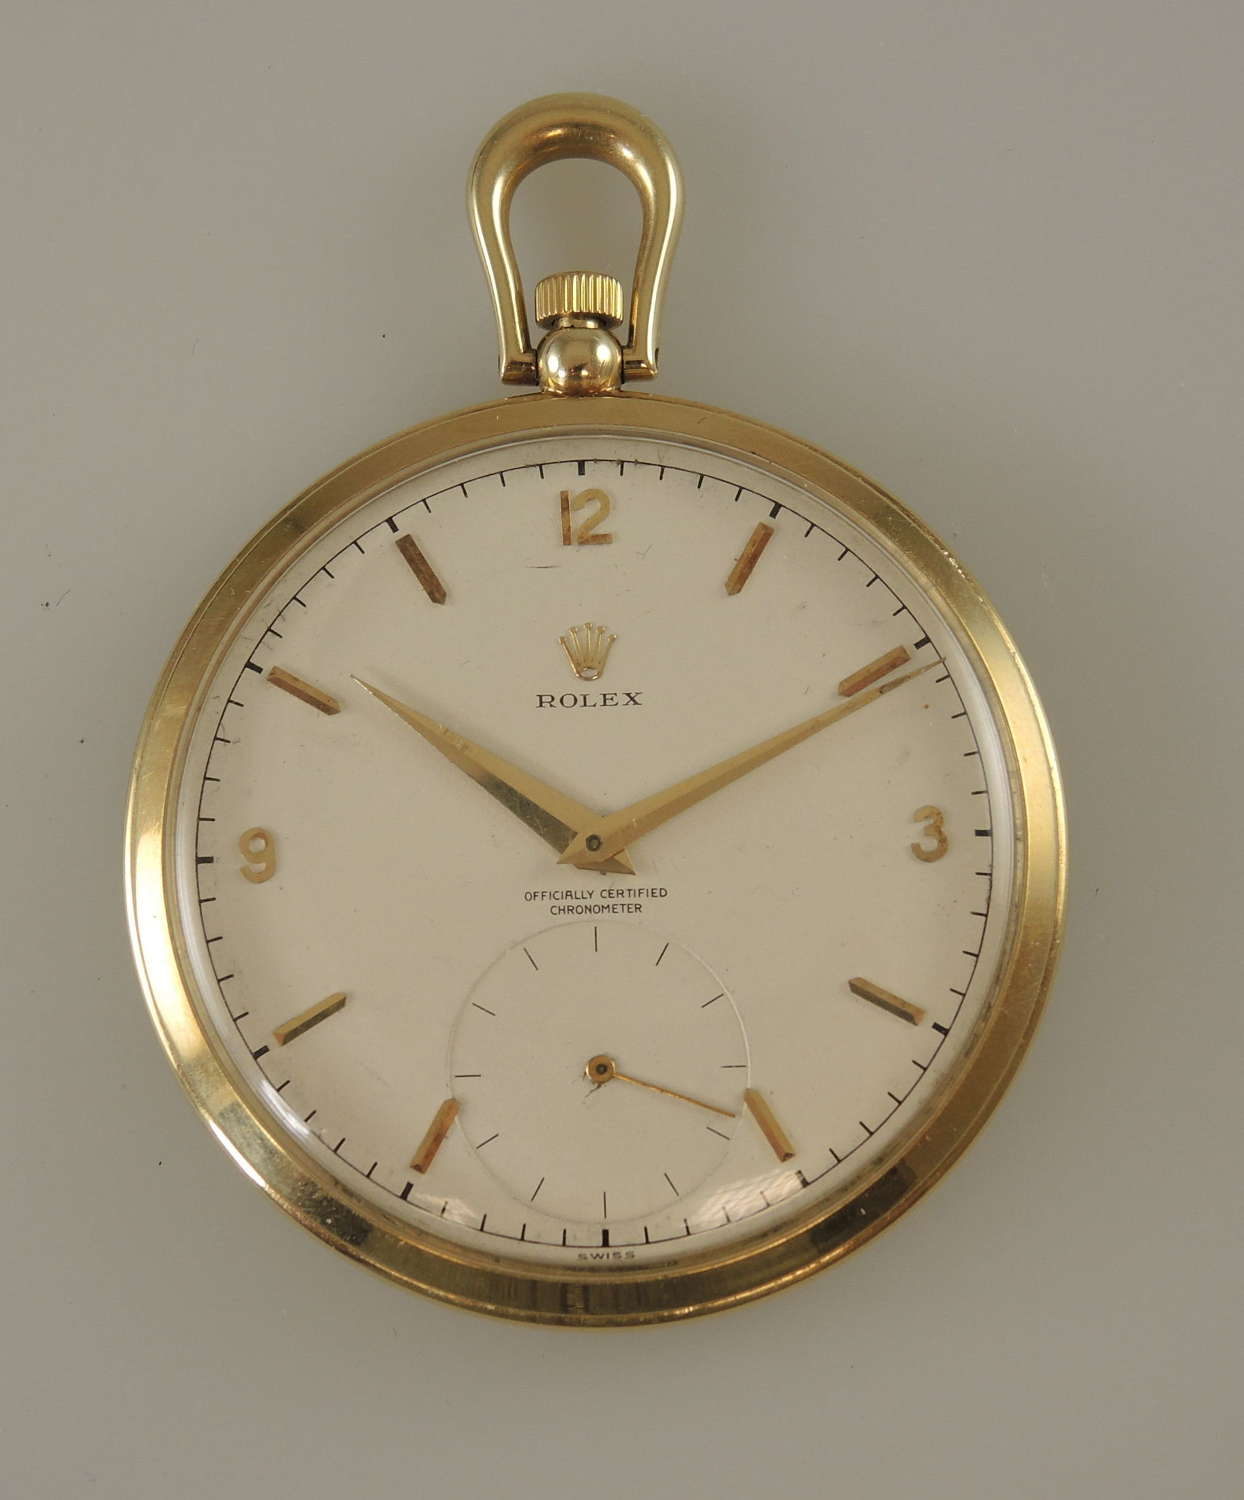 14K gold Rolex pocket watch. Officially Certified Chronometer c1989